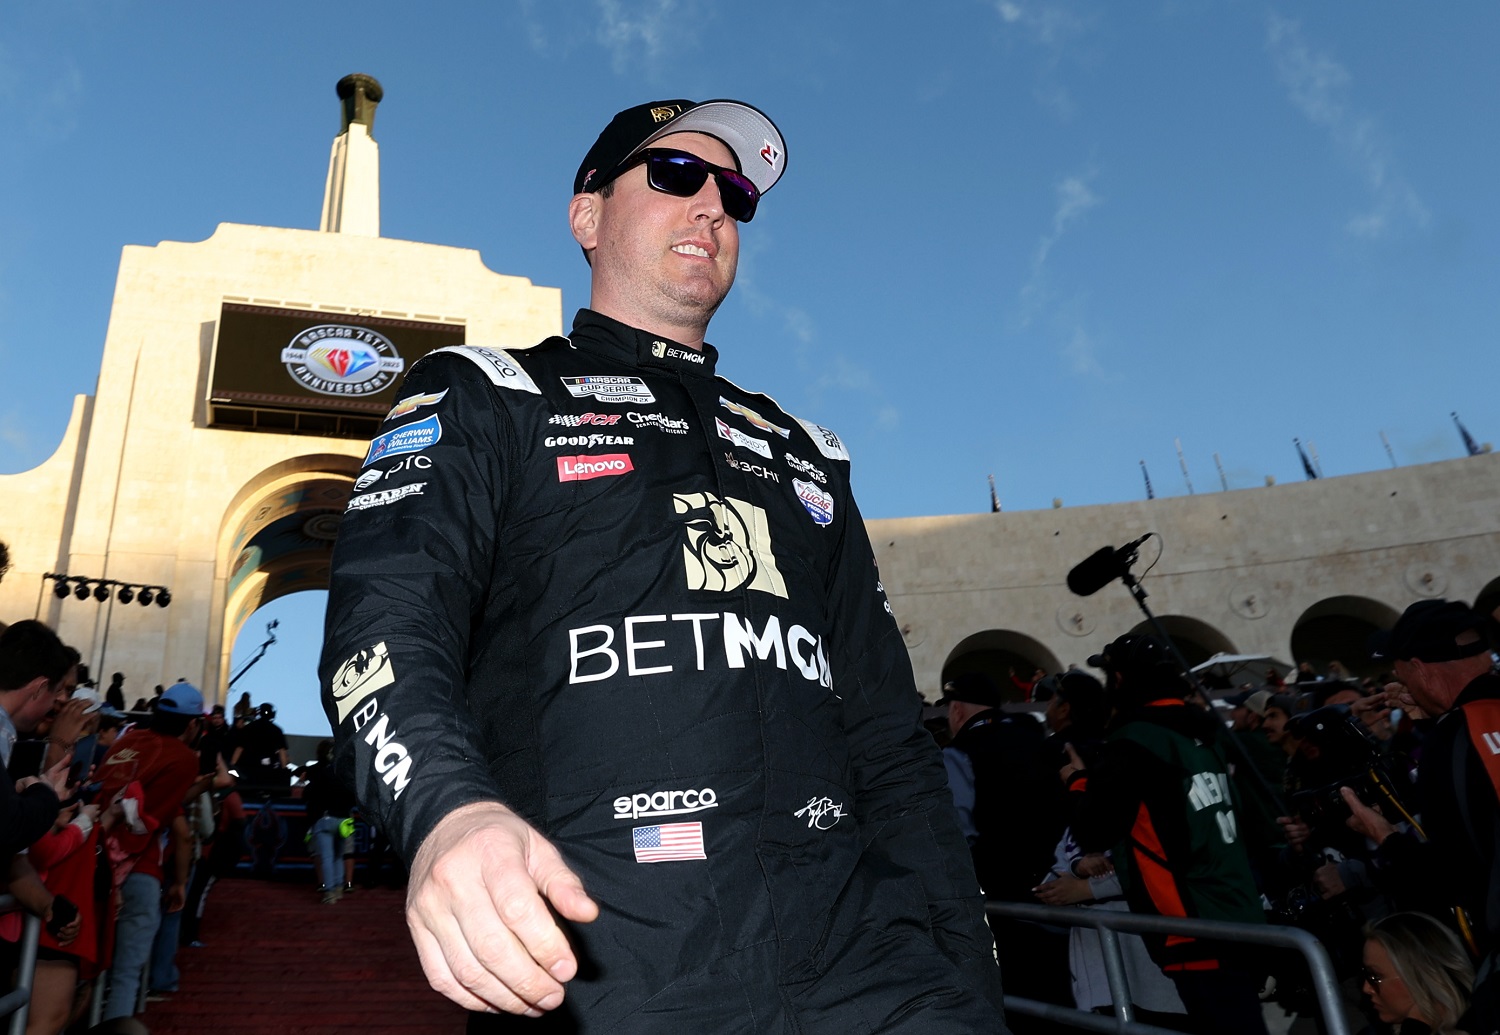 Kyle Busch, driver of the #8 BetMGM Chevrolet, walks down the stairs during driver intros prior to the NASCAR Clash at the Coliseum at Los Angeles Memorial Coliseum on Feb. 5, 2023. | James Gilbert/Getty Images